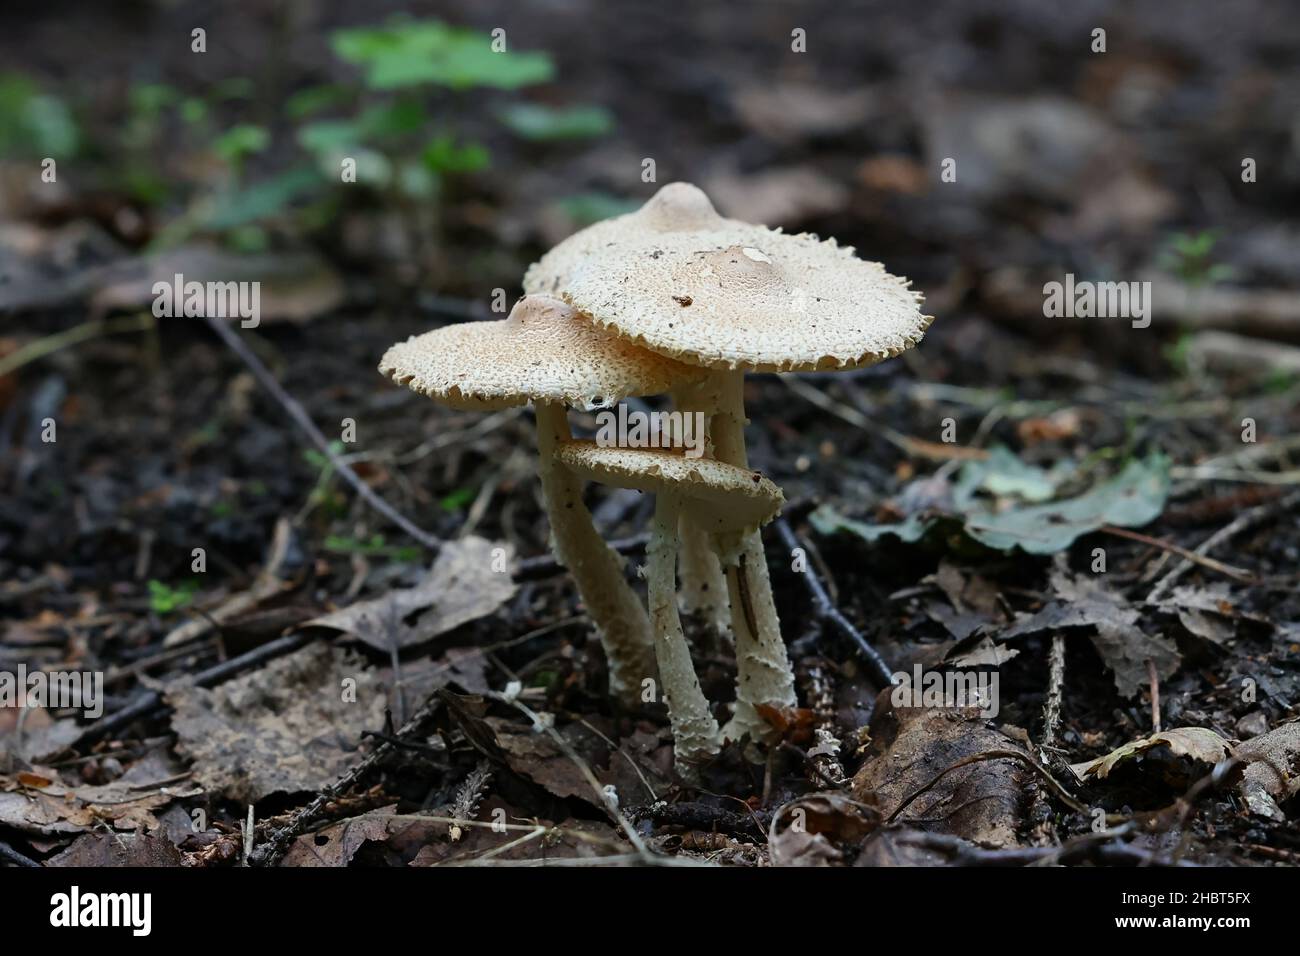 Lepiota clypeolaria, known as the shield dapperling or the shaggy-stalked Lepiota, wild mushrooms from Finland Stock Photo